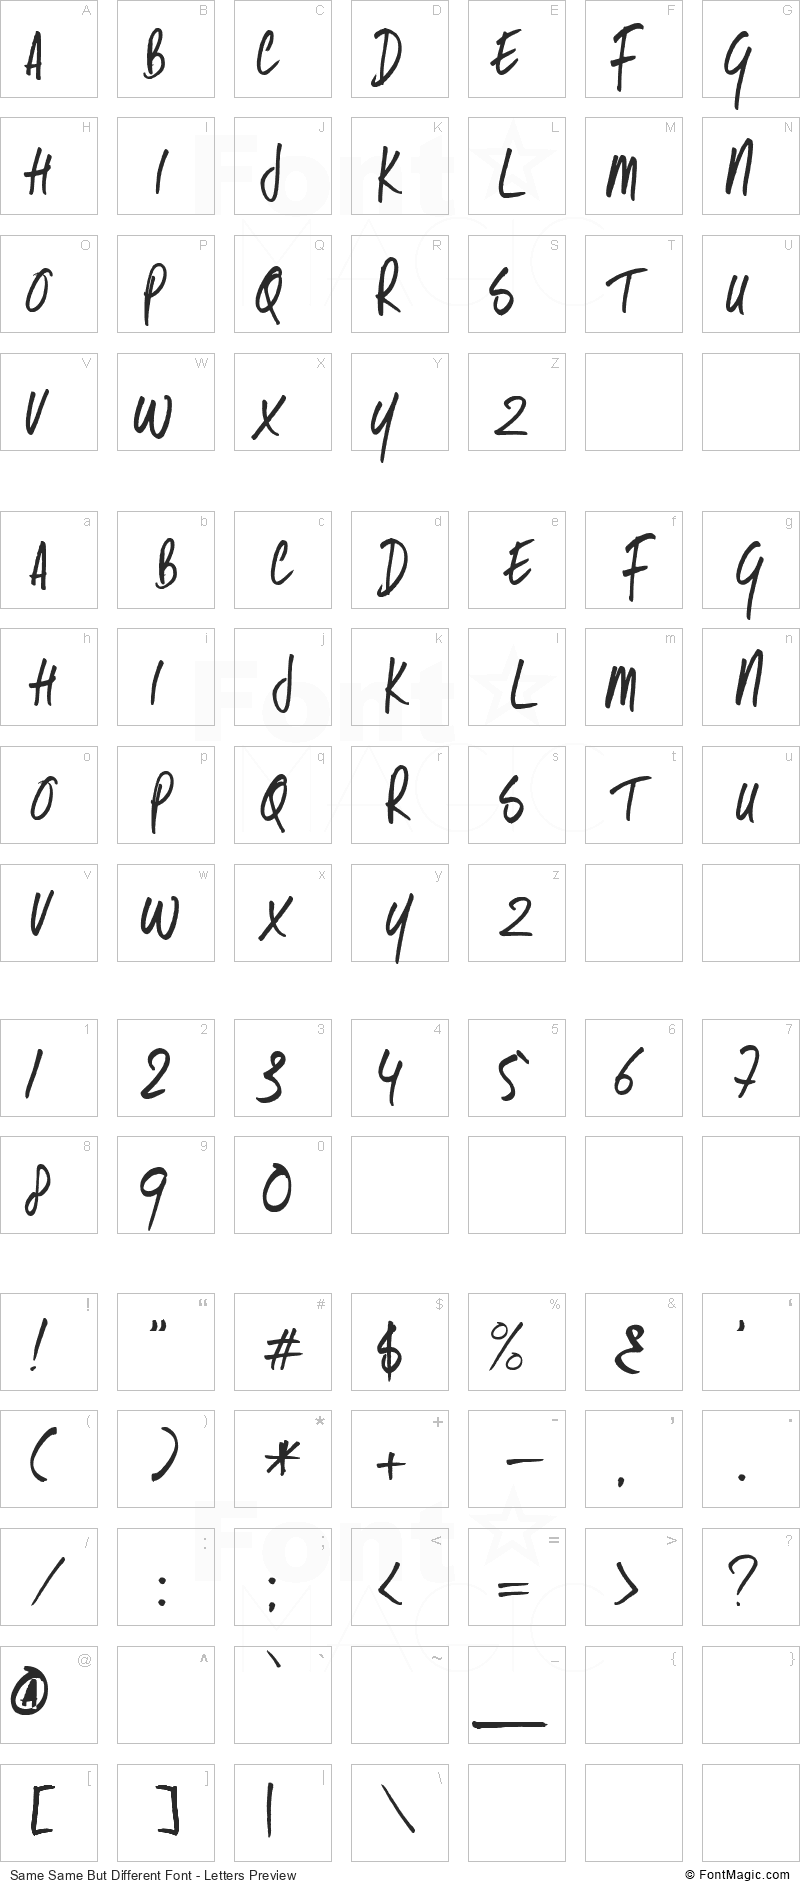 Same Same But Different Font - All Latters Preview Chart